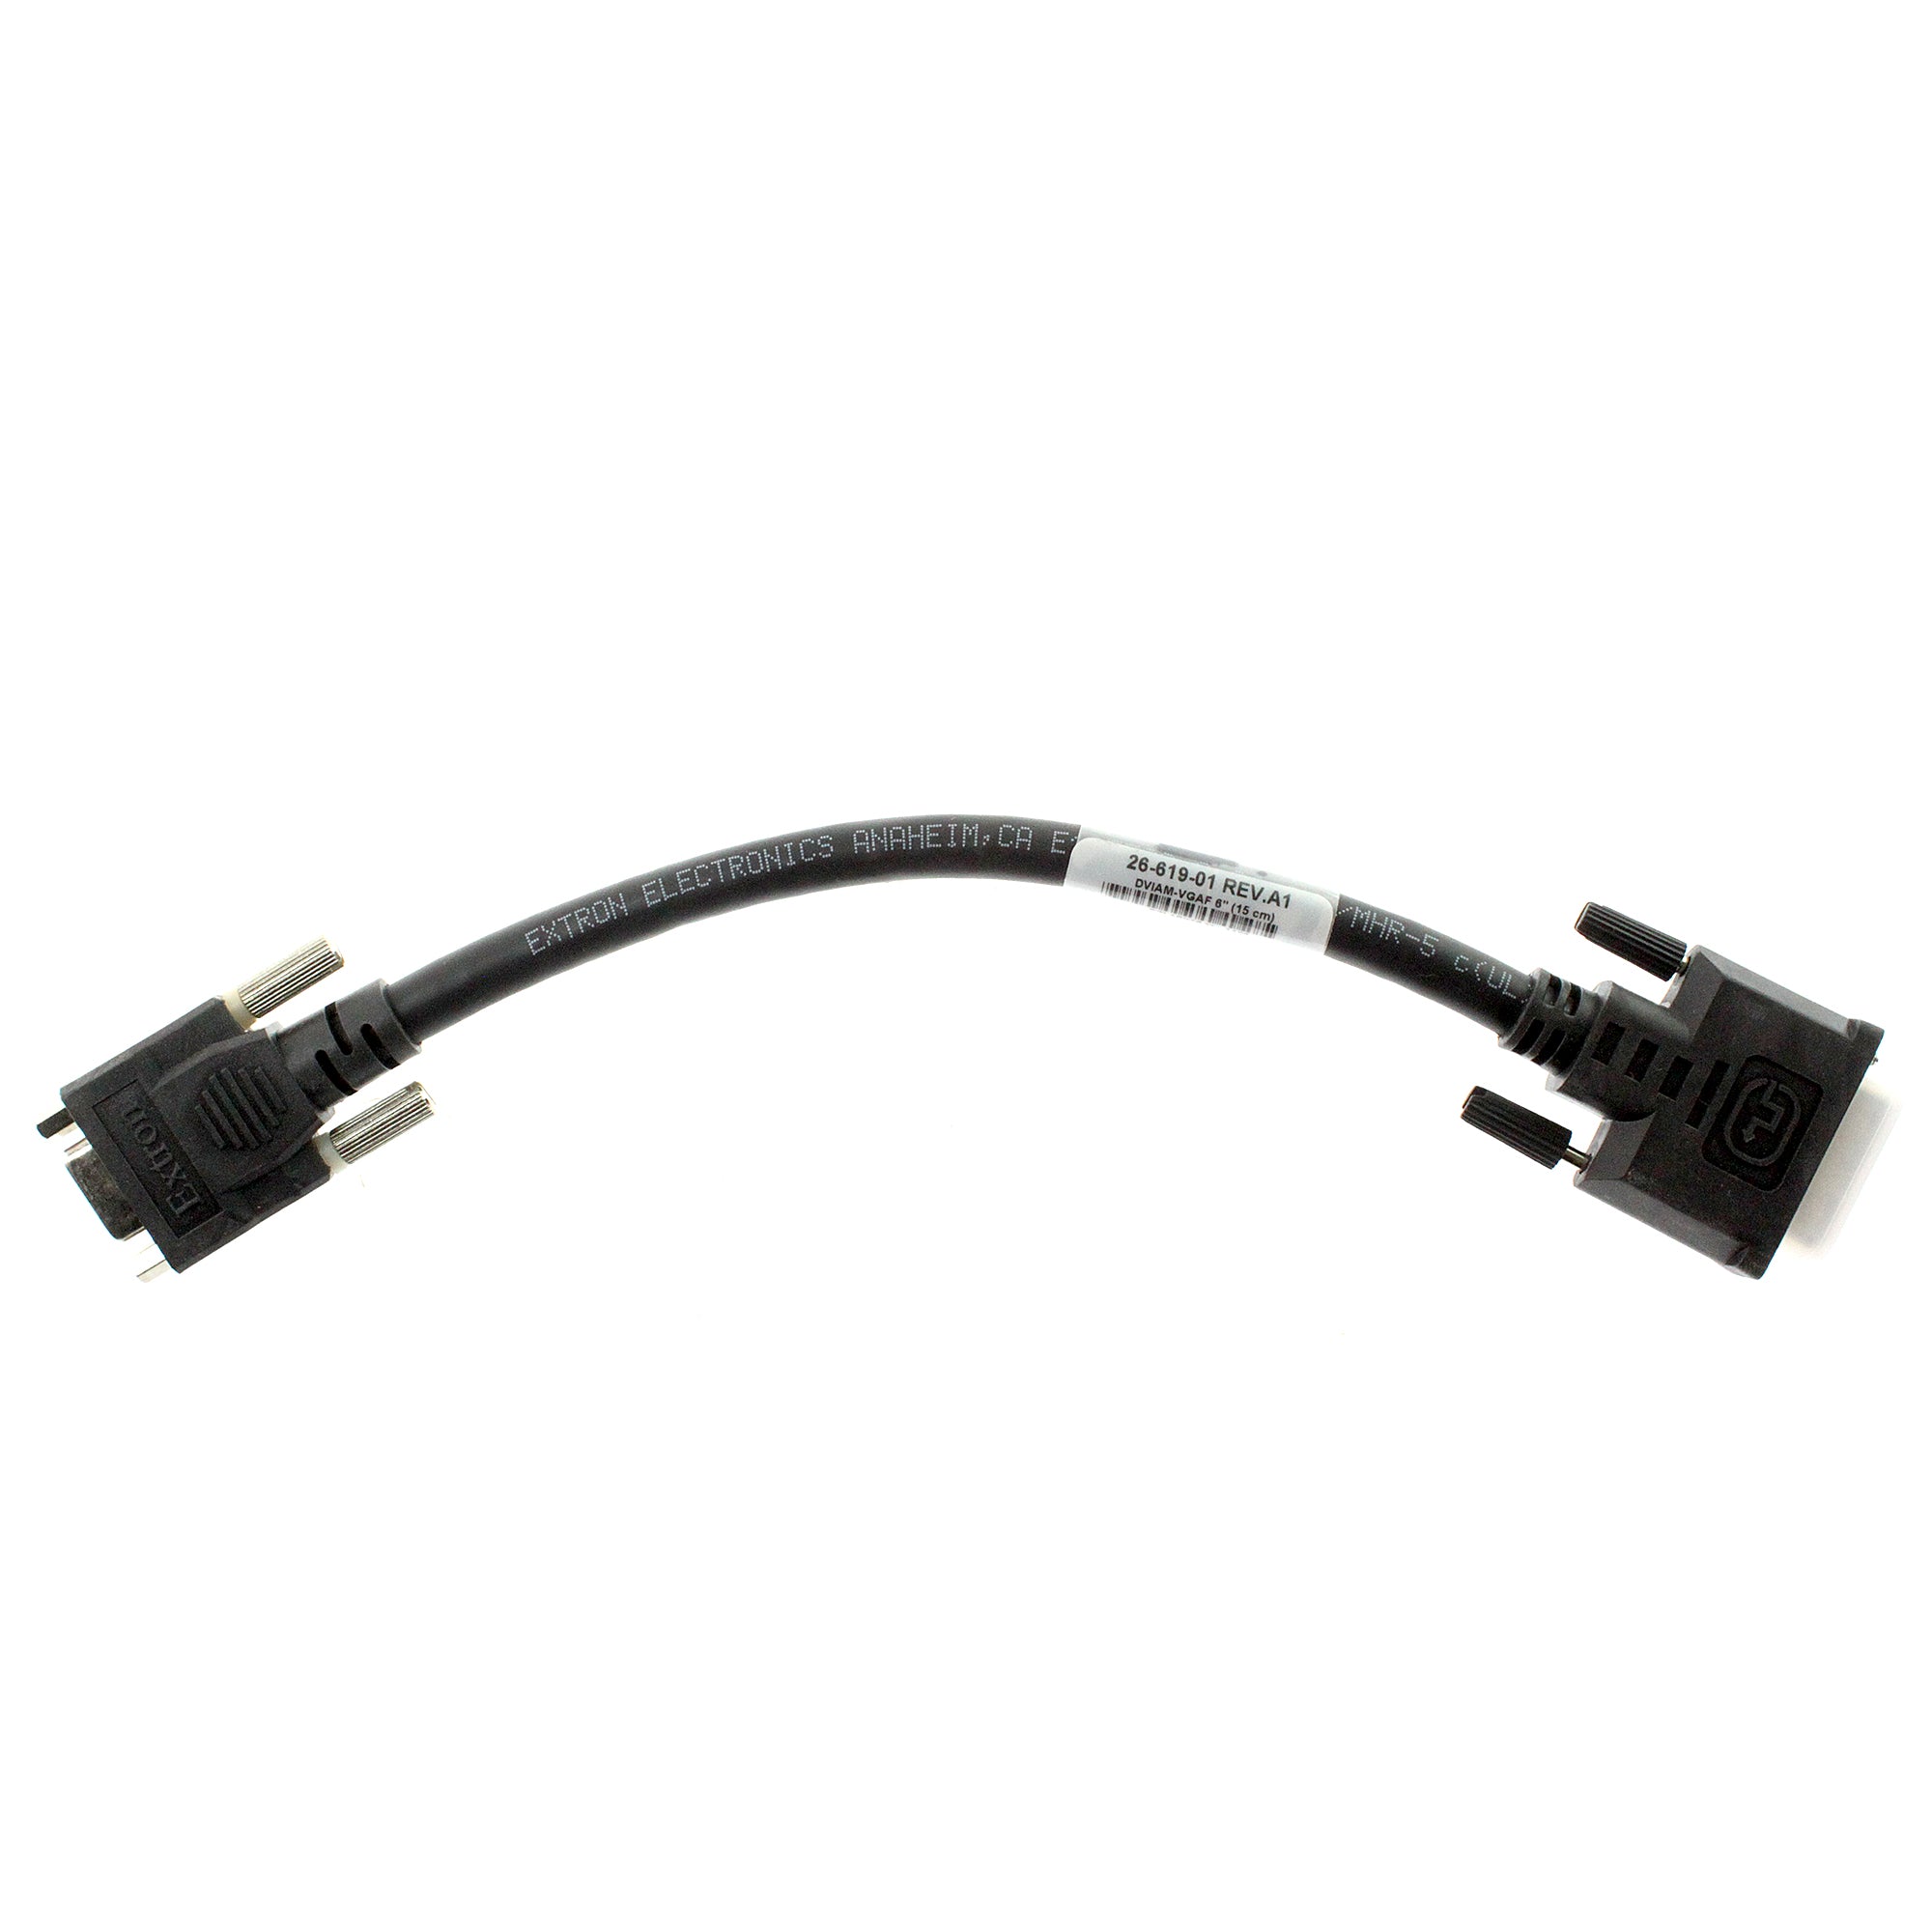 Extron Electronics, EXTRON ELECTRONICS 26-619-01 6" DVI-A MALE TO VGA FEMALE PIGTAIL ADAPTER, 6-INCH